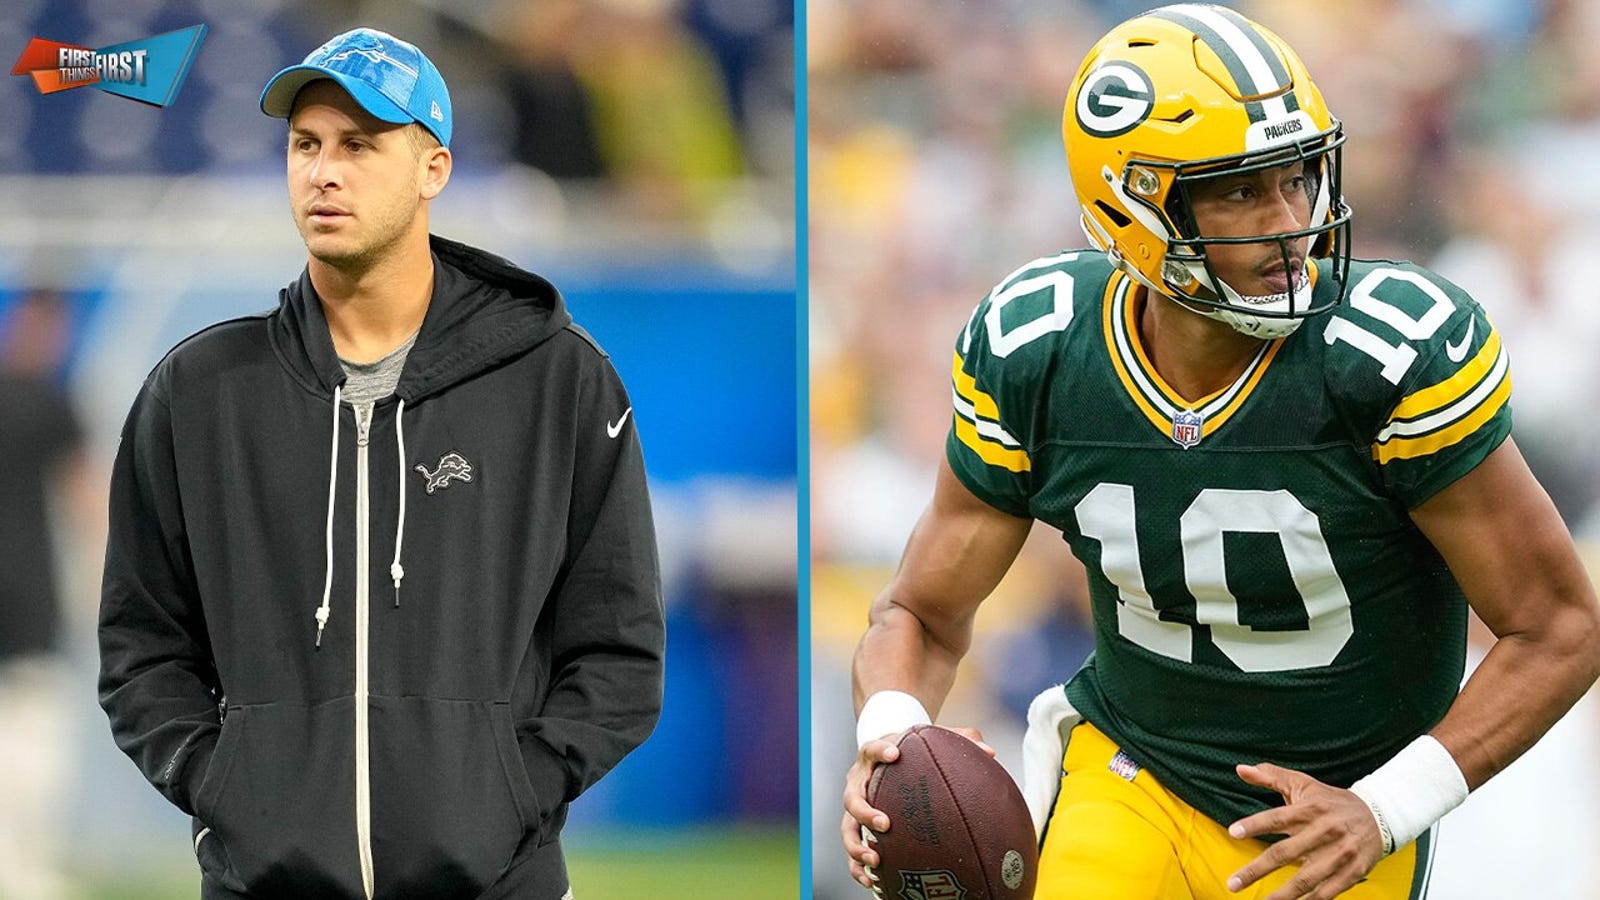 Will Lions or Packers snag the NFC North title? | FIRST THINGS FIRST